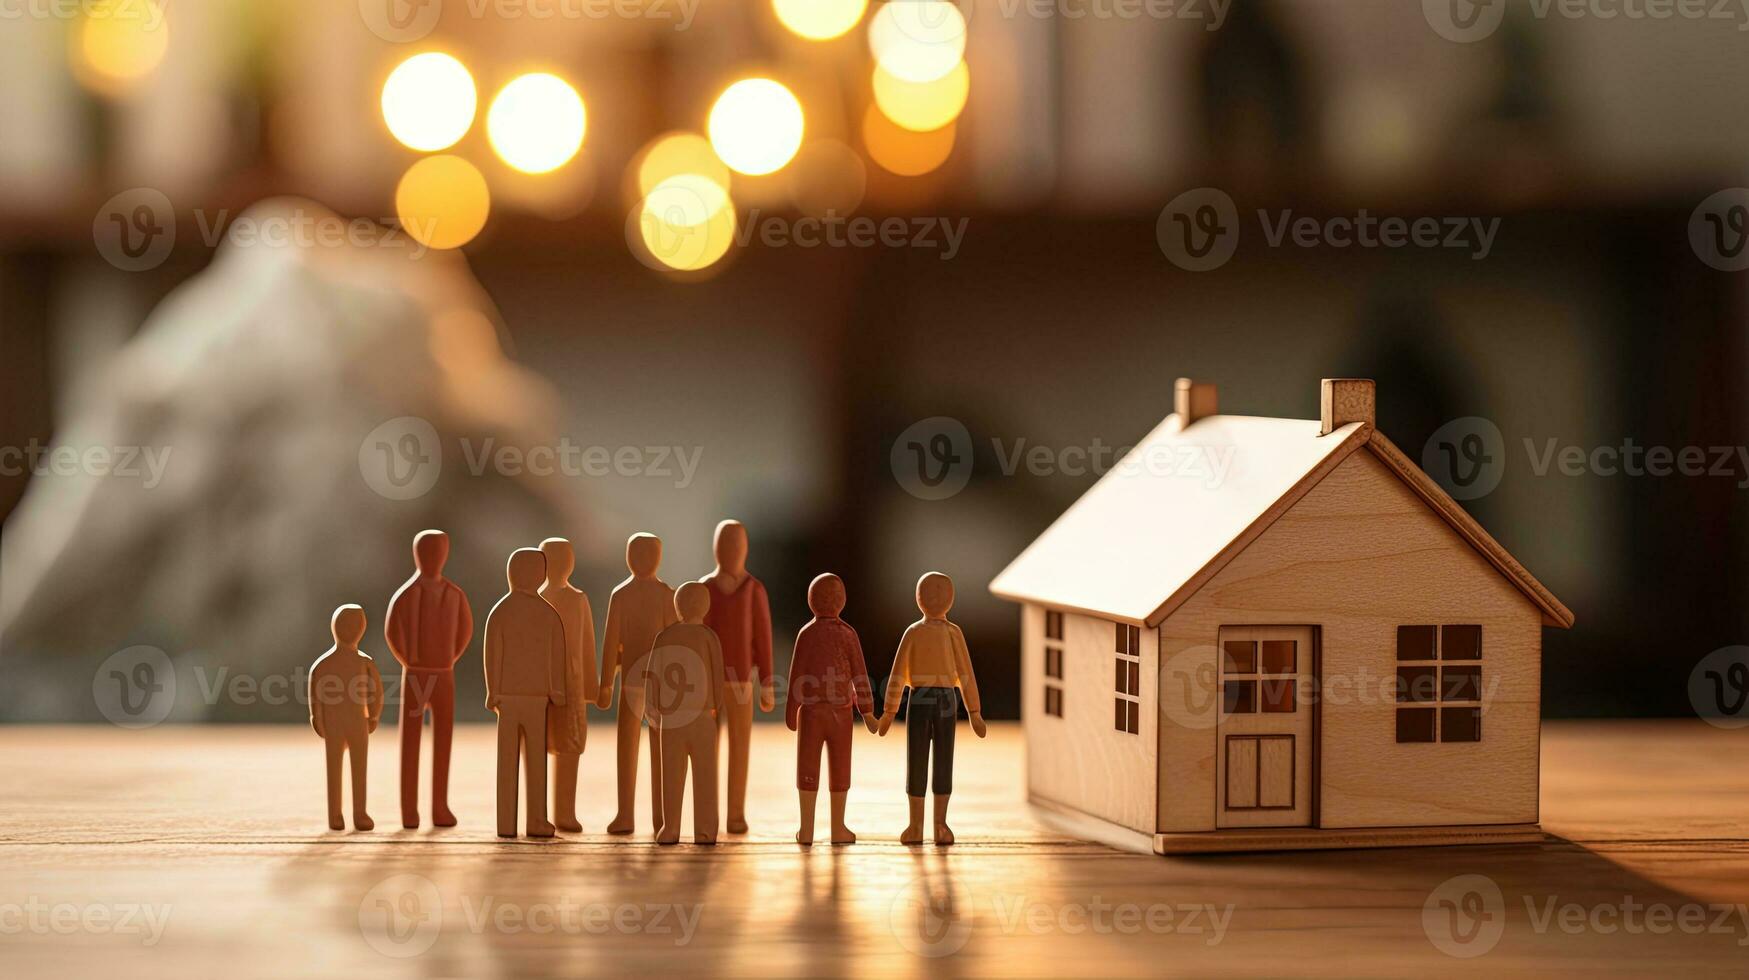 Miniature wooden figurines of family and small house on table in bright room. silhouette concept photo